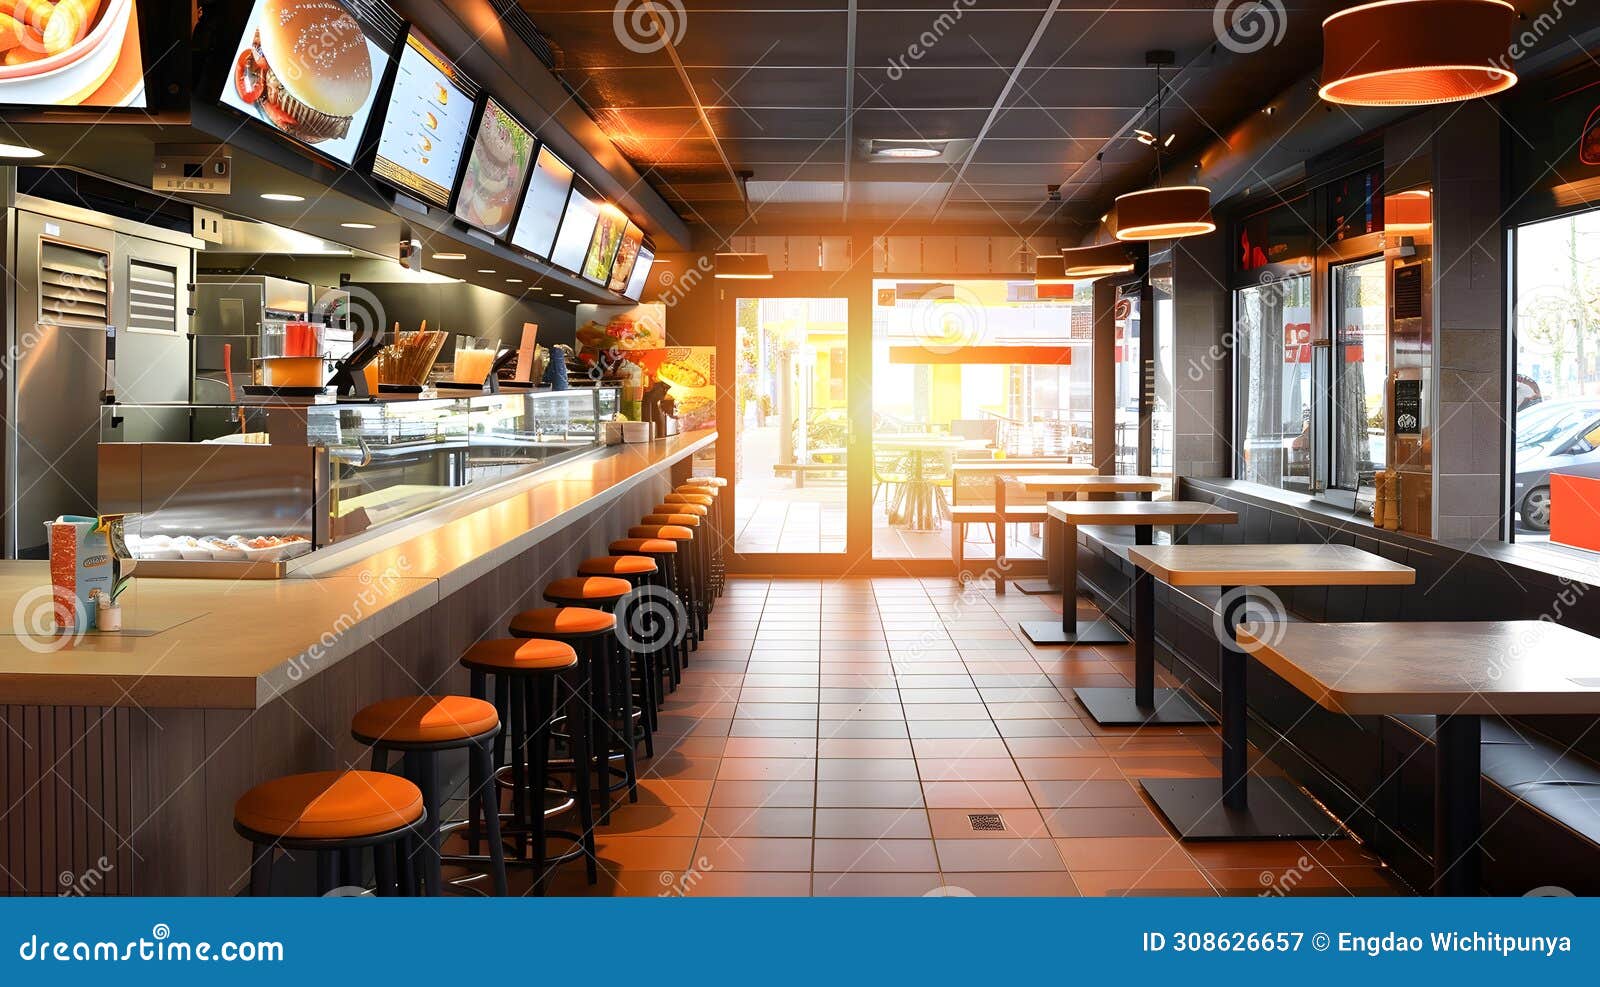 mcdonalds restaurant in dutch style with spacious interior and food for sale